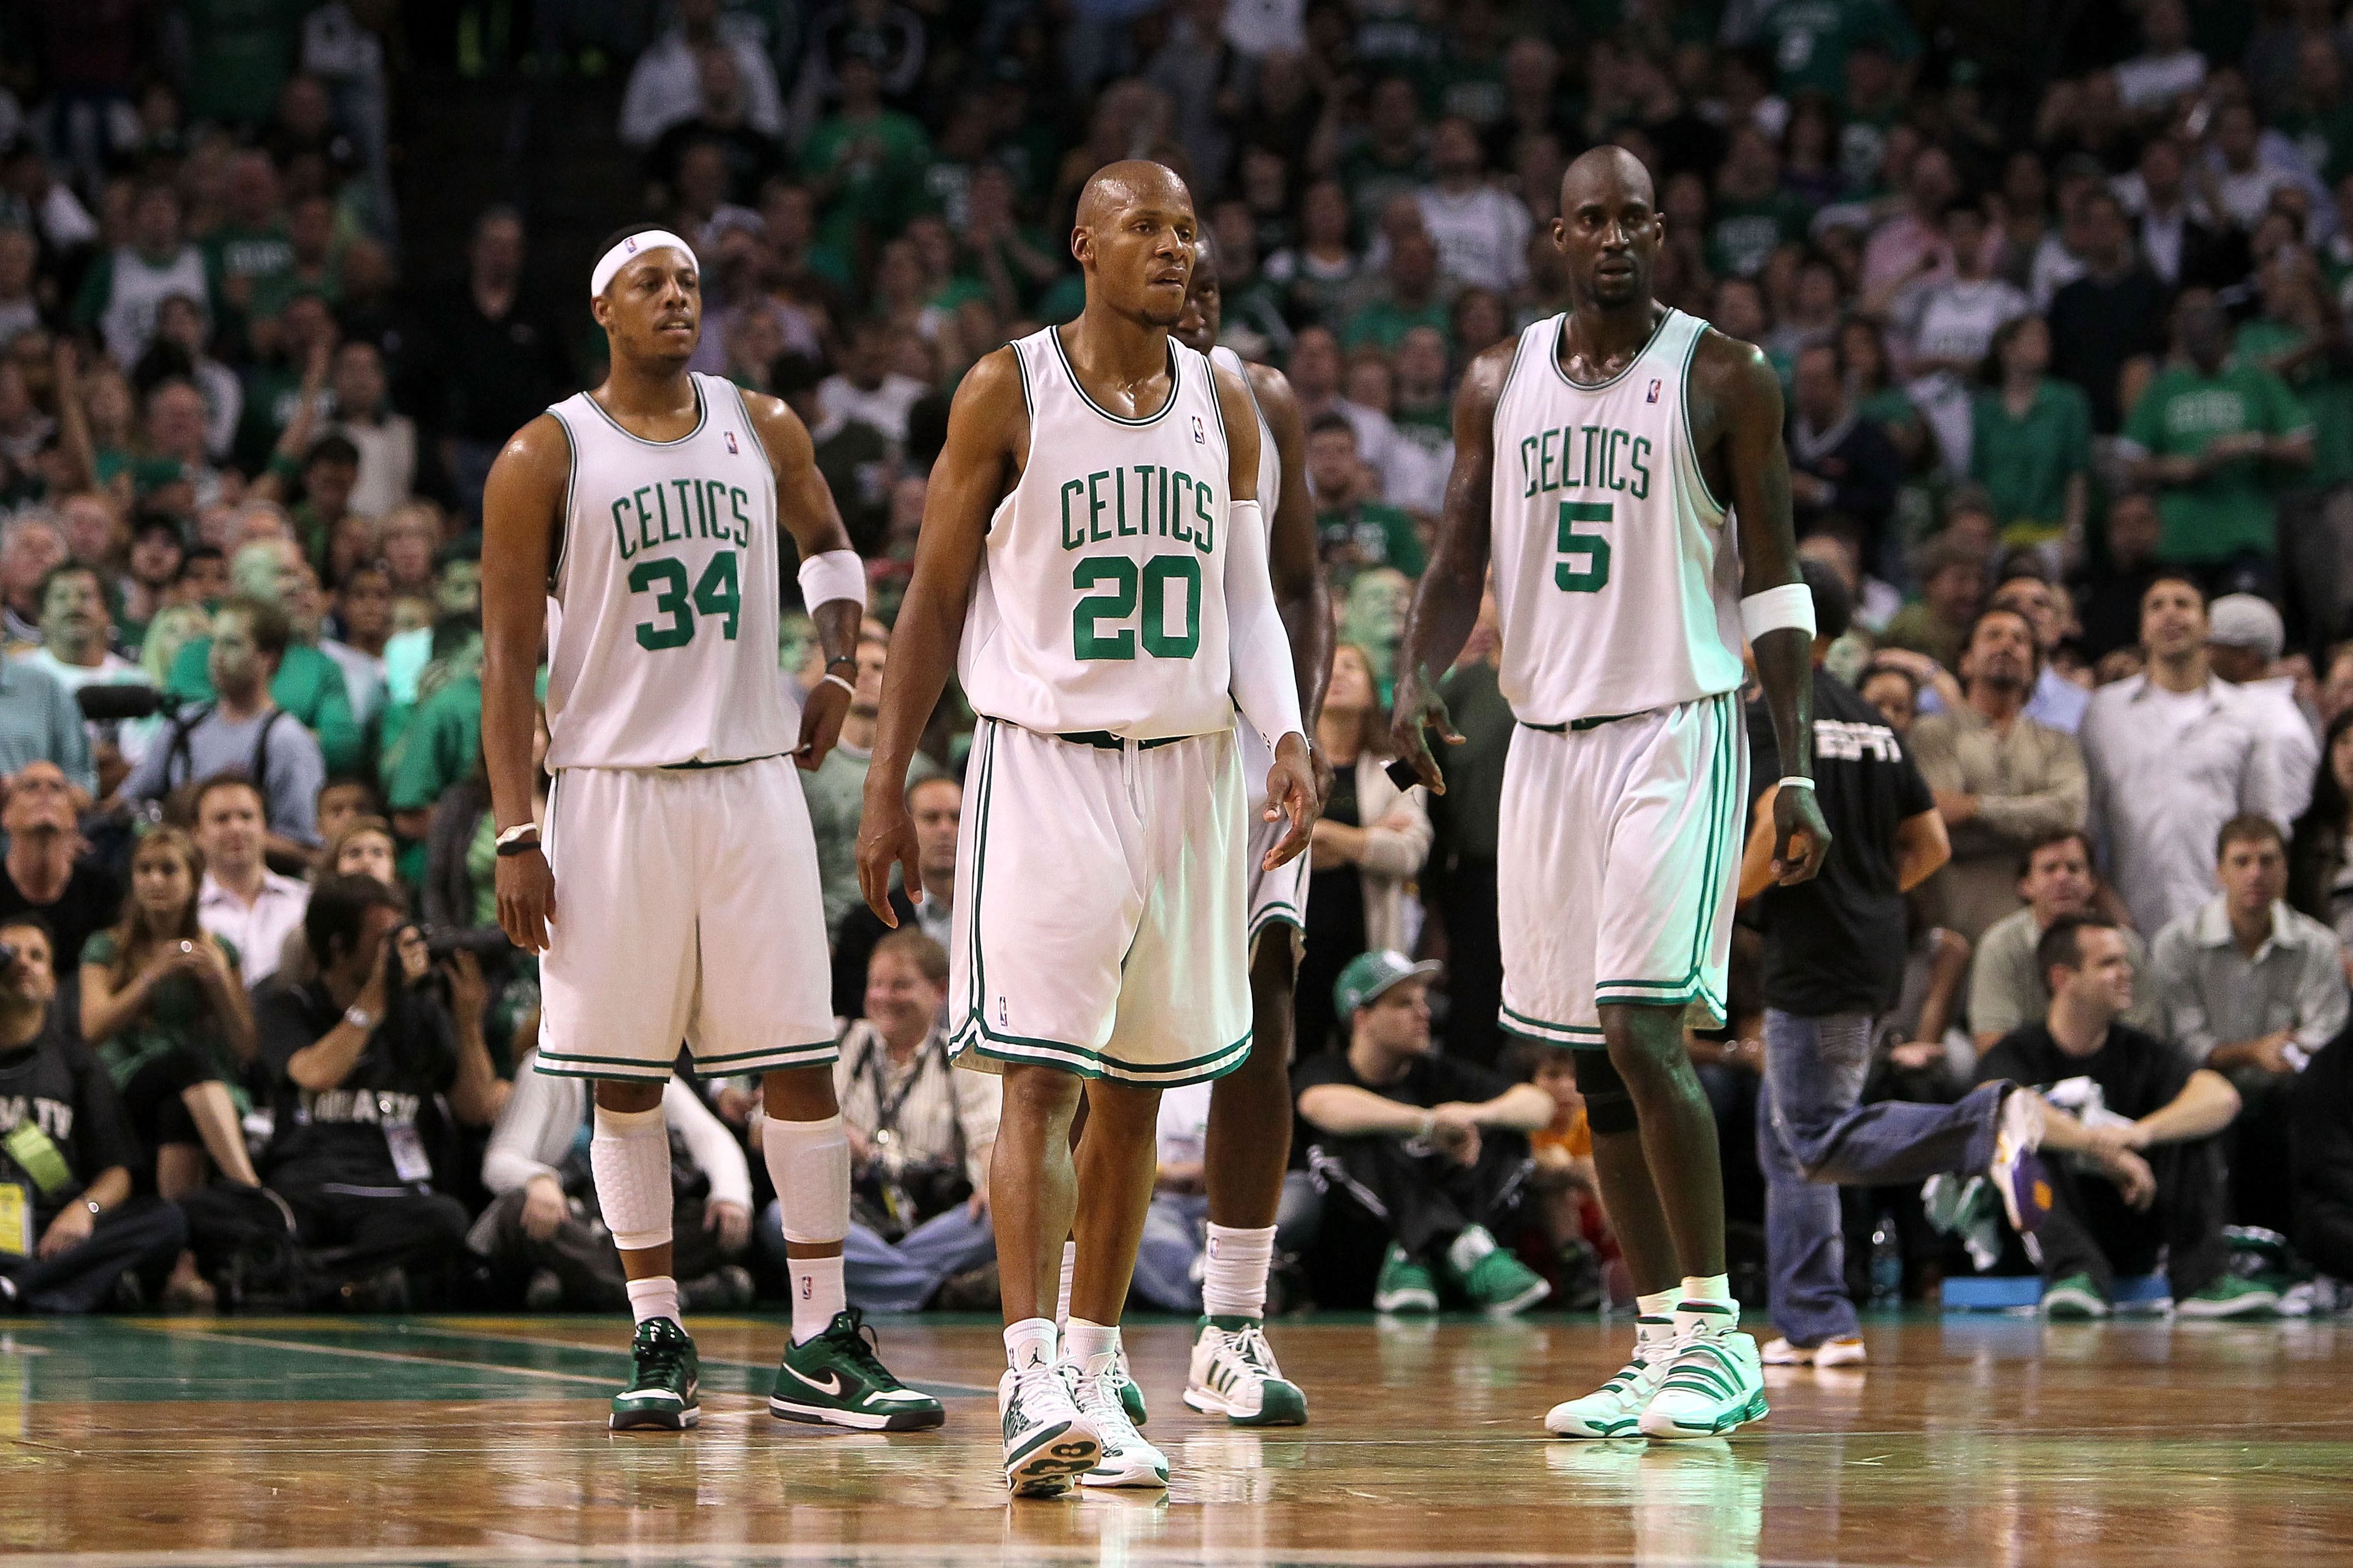 BOSTON - MAY 28:  (L-R) Paul PIerce #34, Ray Allen #20 and Kevin Garnett #5 of the Boston Celtics look on against the Orlando Magic in Game Six of the Eastern Conference Finals during the 2010 NBA Playoffs at TD Garden on May 28, 2010 in Boston, Massachus